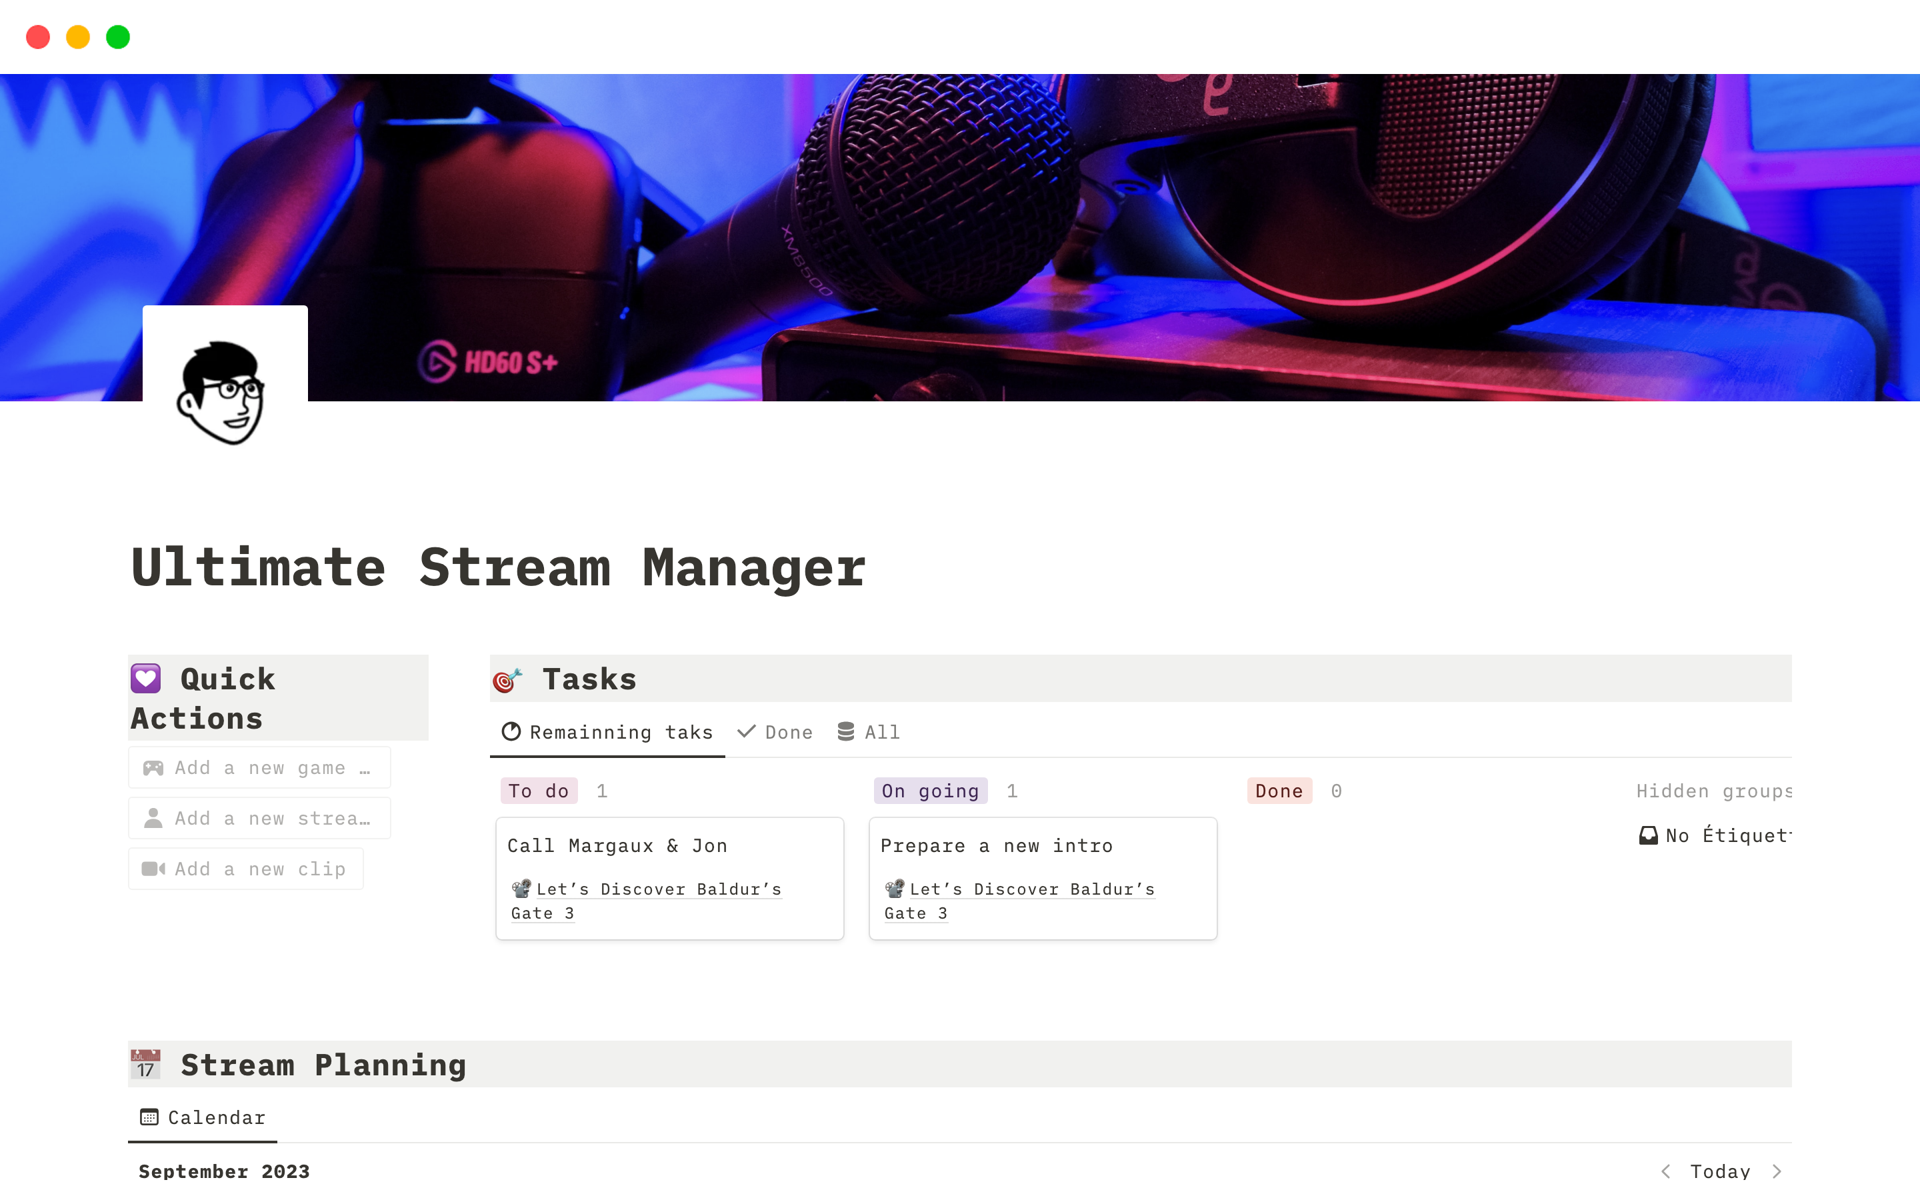 Prepare your stream, create a list of task for it, manage your video game library and add your stream buddies & stream clips in this template notion.